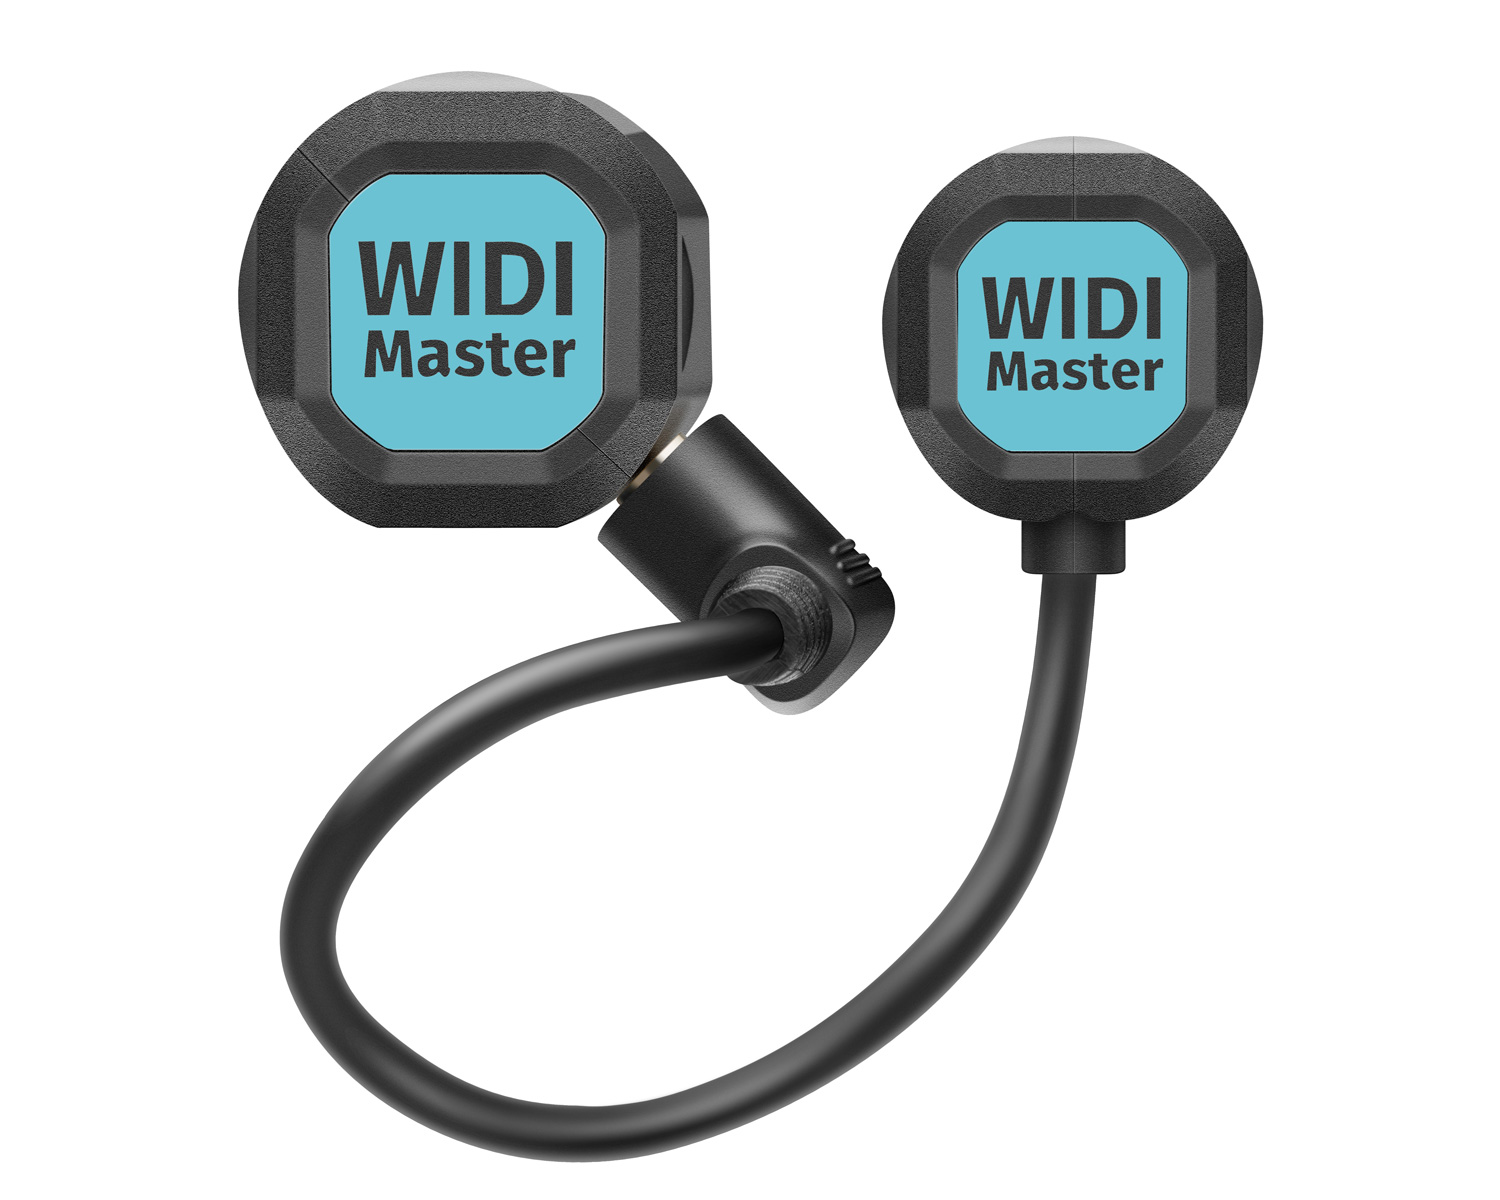 CME WIDI Master (2-Pieces) Bluetooth MIDI Controller | Standalone MIDI  Hardware with Any iOS Device or Mac by Using WIDI Master Bundled with HogoR